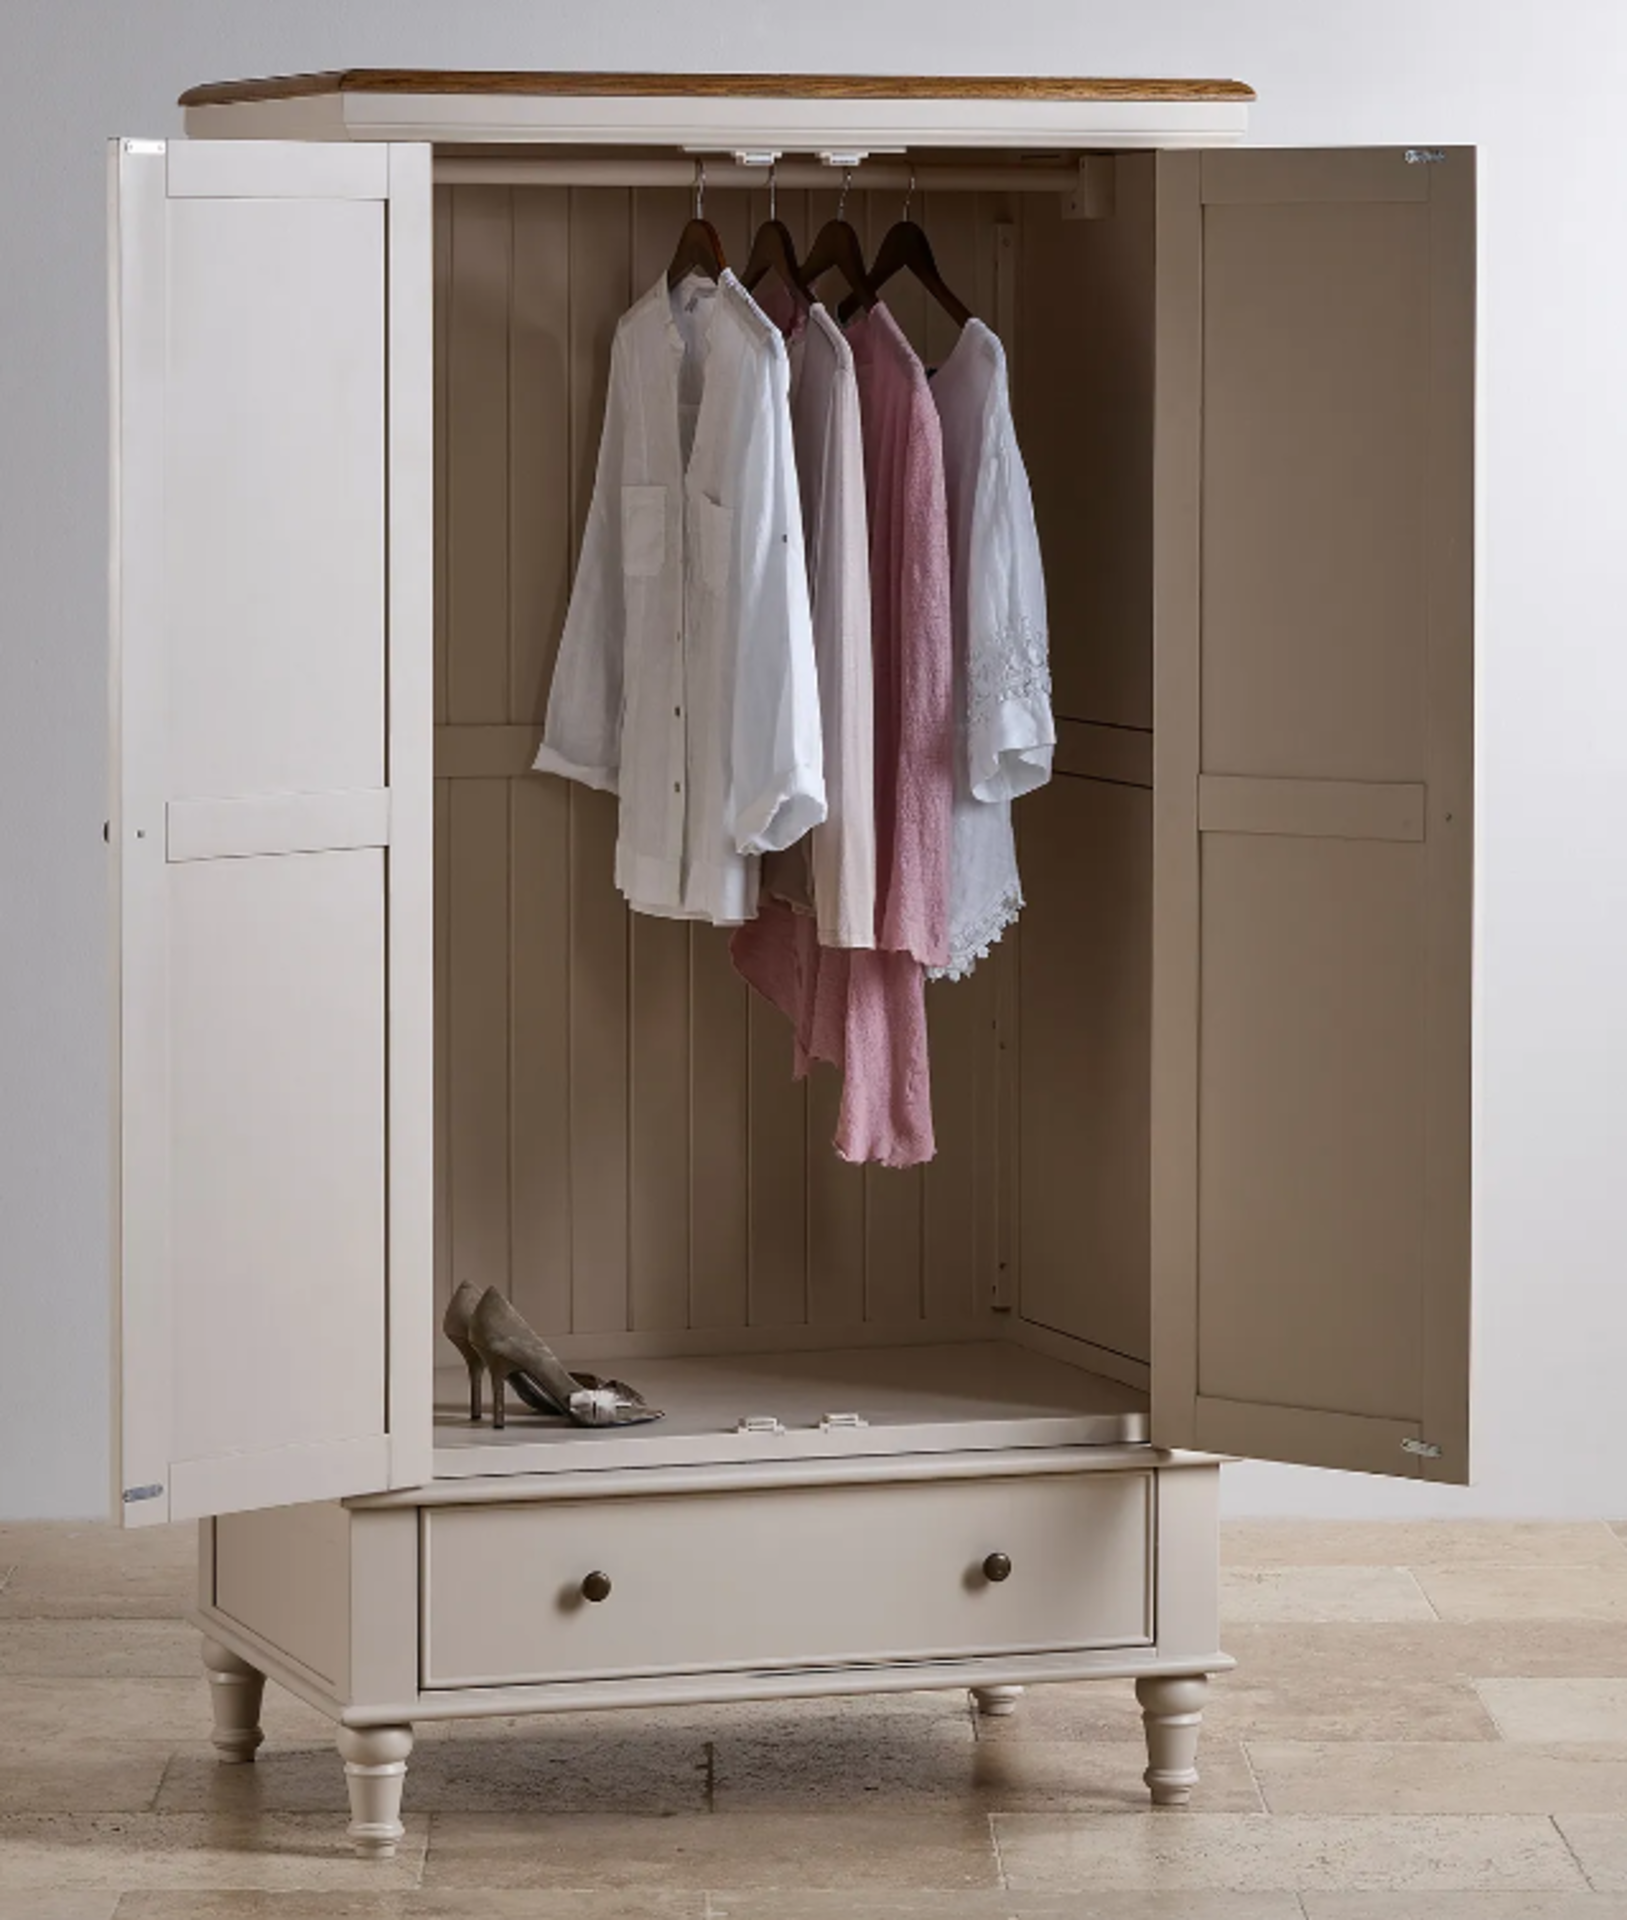 SHAY Rustic Solid Oak & Painted Double Wardrobe. RRP £959.99. Our Shay double wardrobe brings simple - Image 2 of 2